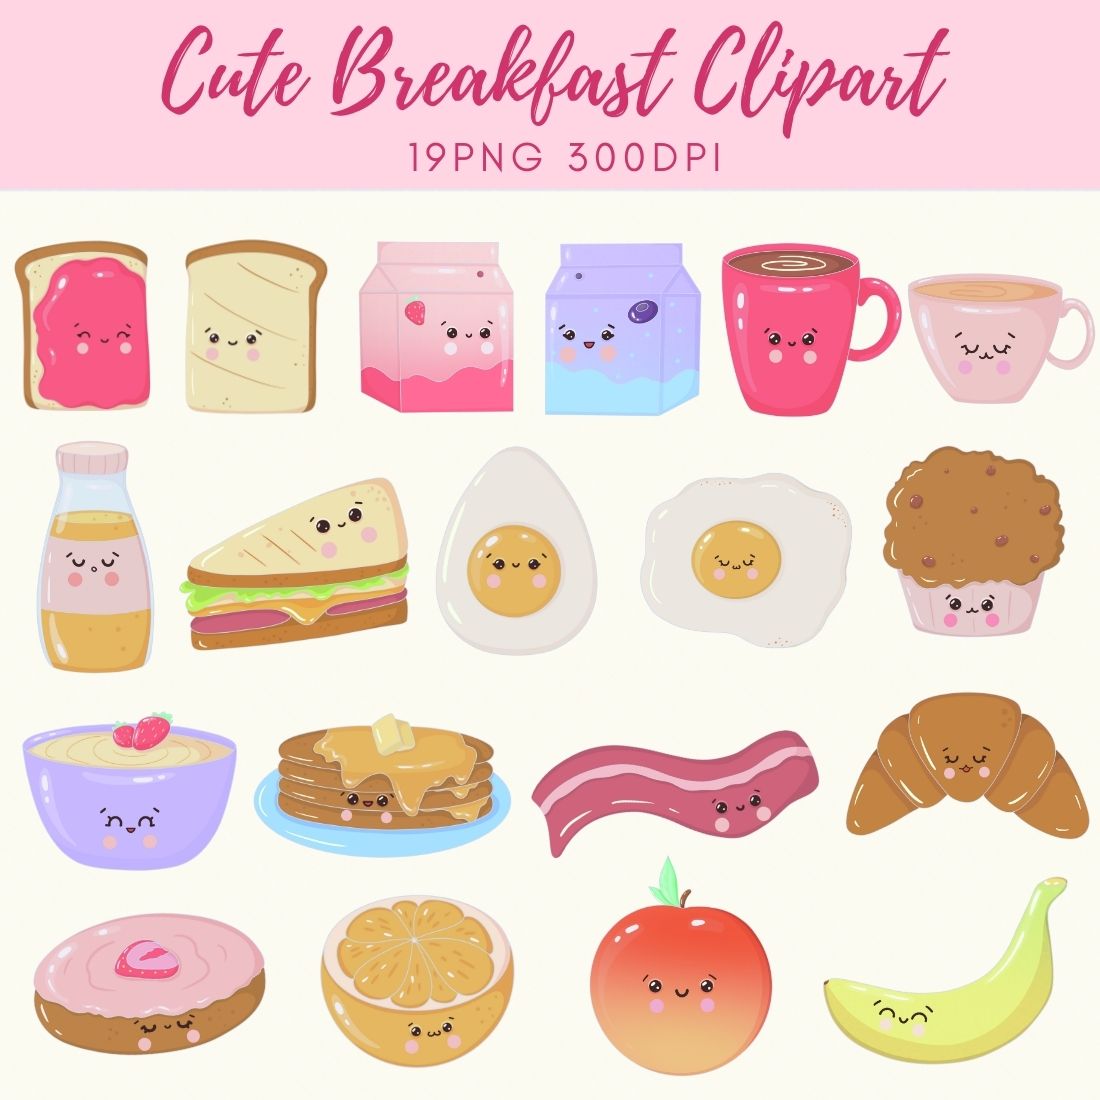 Food Clip Art - Hand drawn clip art, food collage sheet, desserts clipart,  breakfast clipart, cafe art, typography clipart, doodle clipart